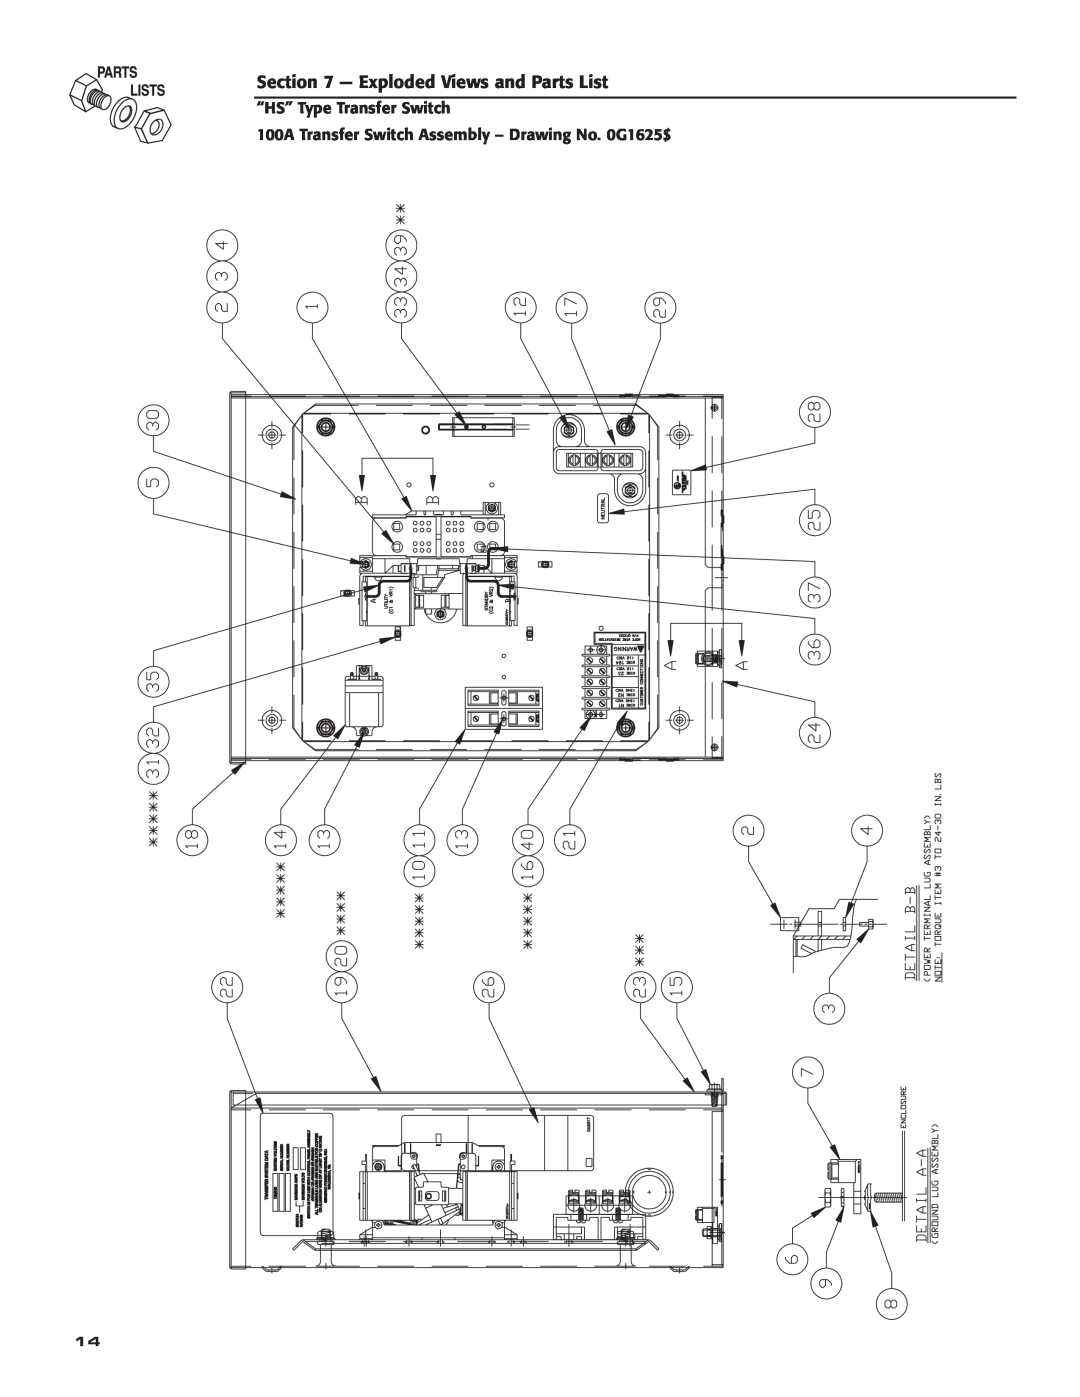 Siemens SR200R, SR100R owner manual Exploded Views and Parts List, “HS” Type Transfer Switch 